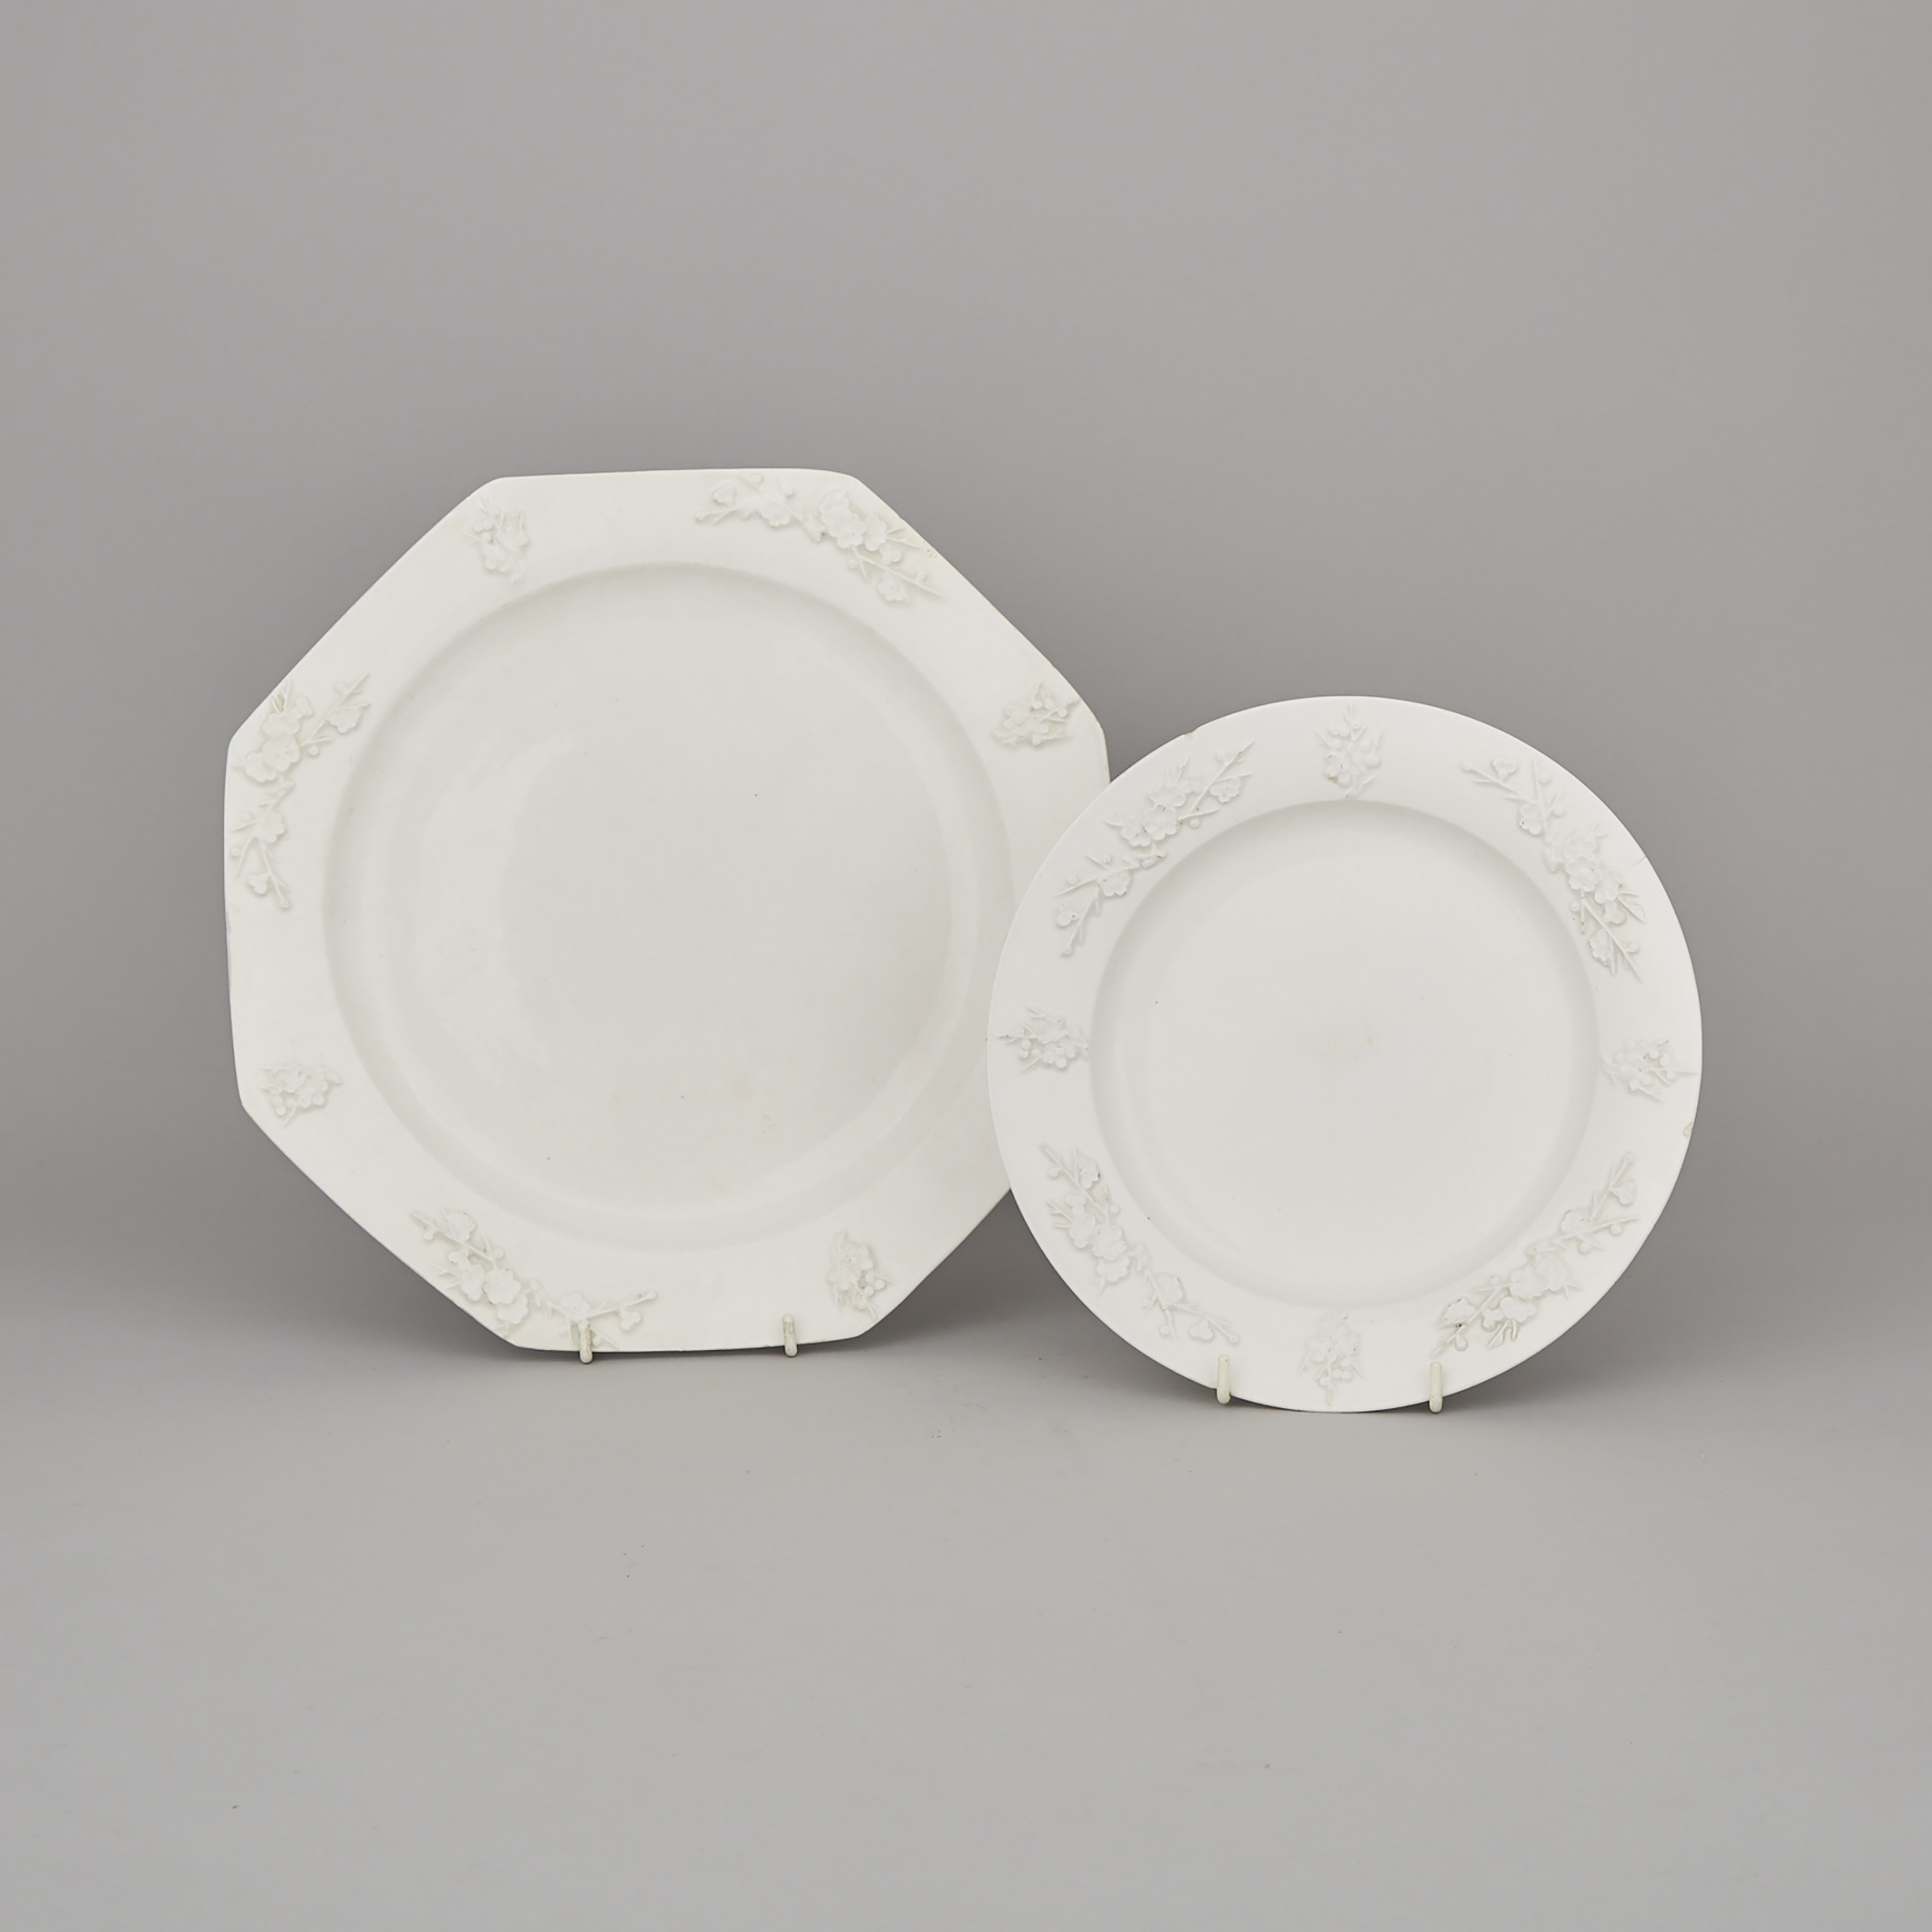 Bow White Moulded Prunus Octagonal Charger and Plate, c.1755